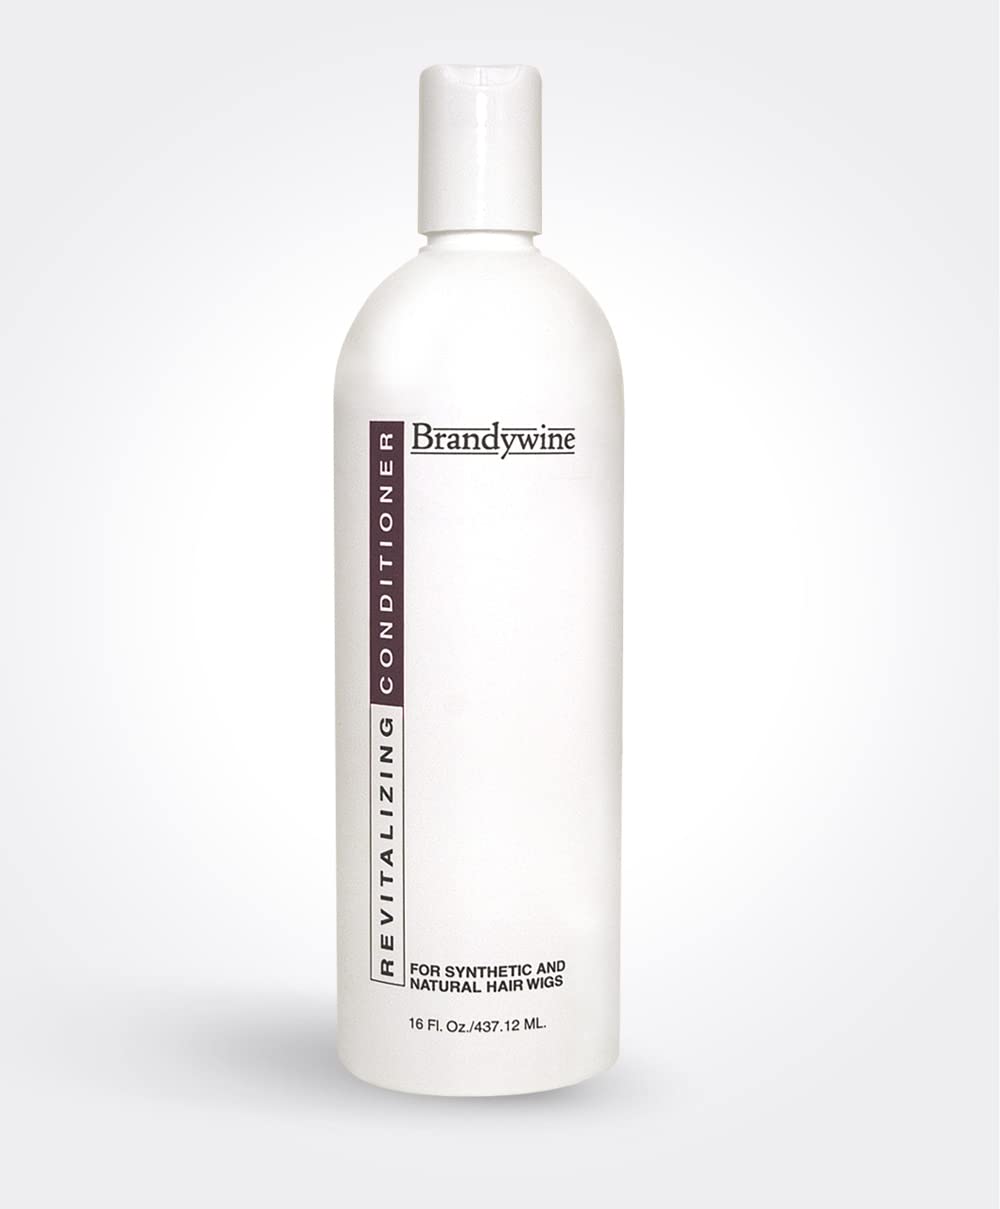 Brandywine Revitalizing Conditioner for Synthetic and Natural Hair Wigs, 8 Ounce